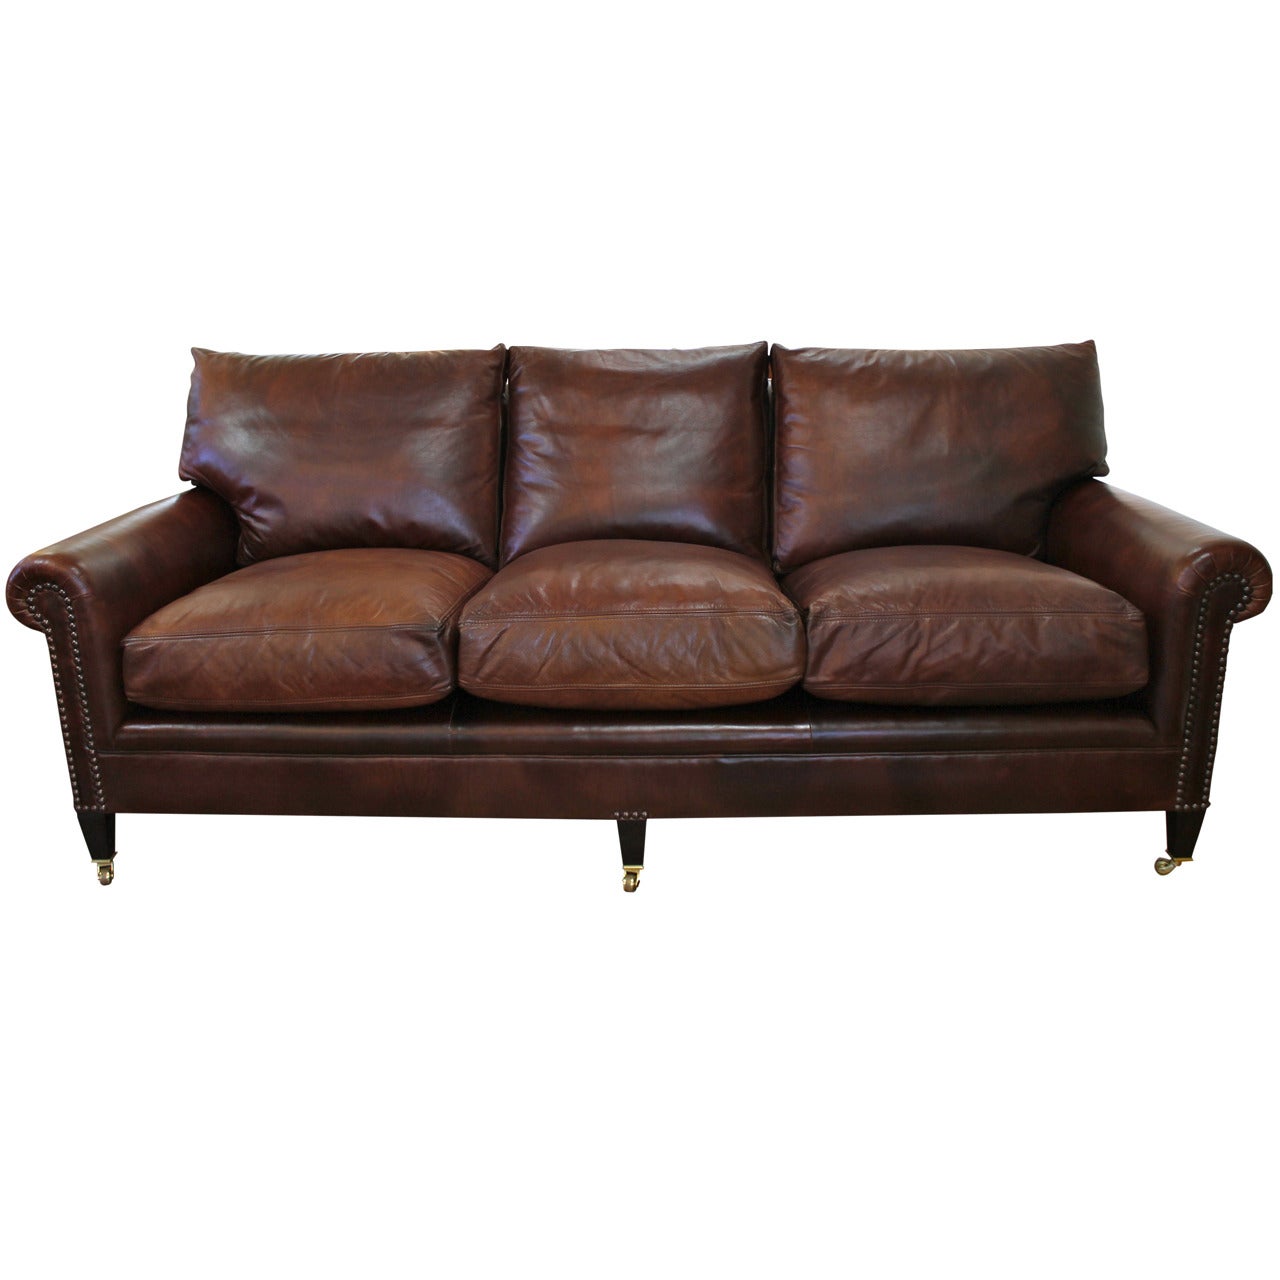 George Smith Leather Sofa in "American Chocolate" Color